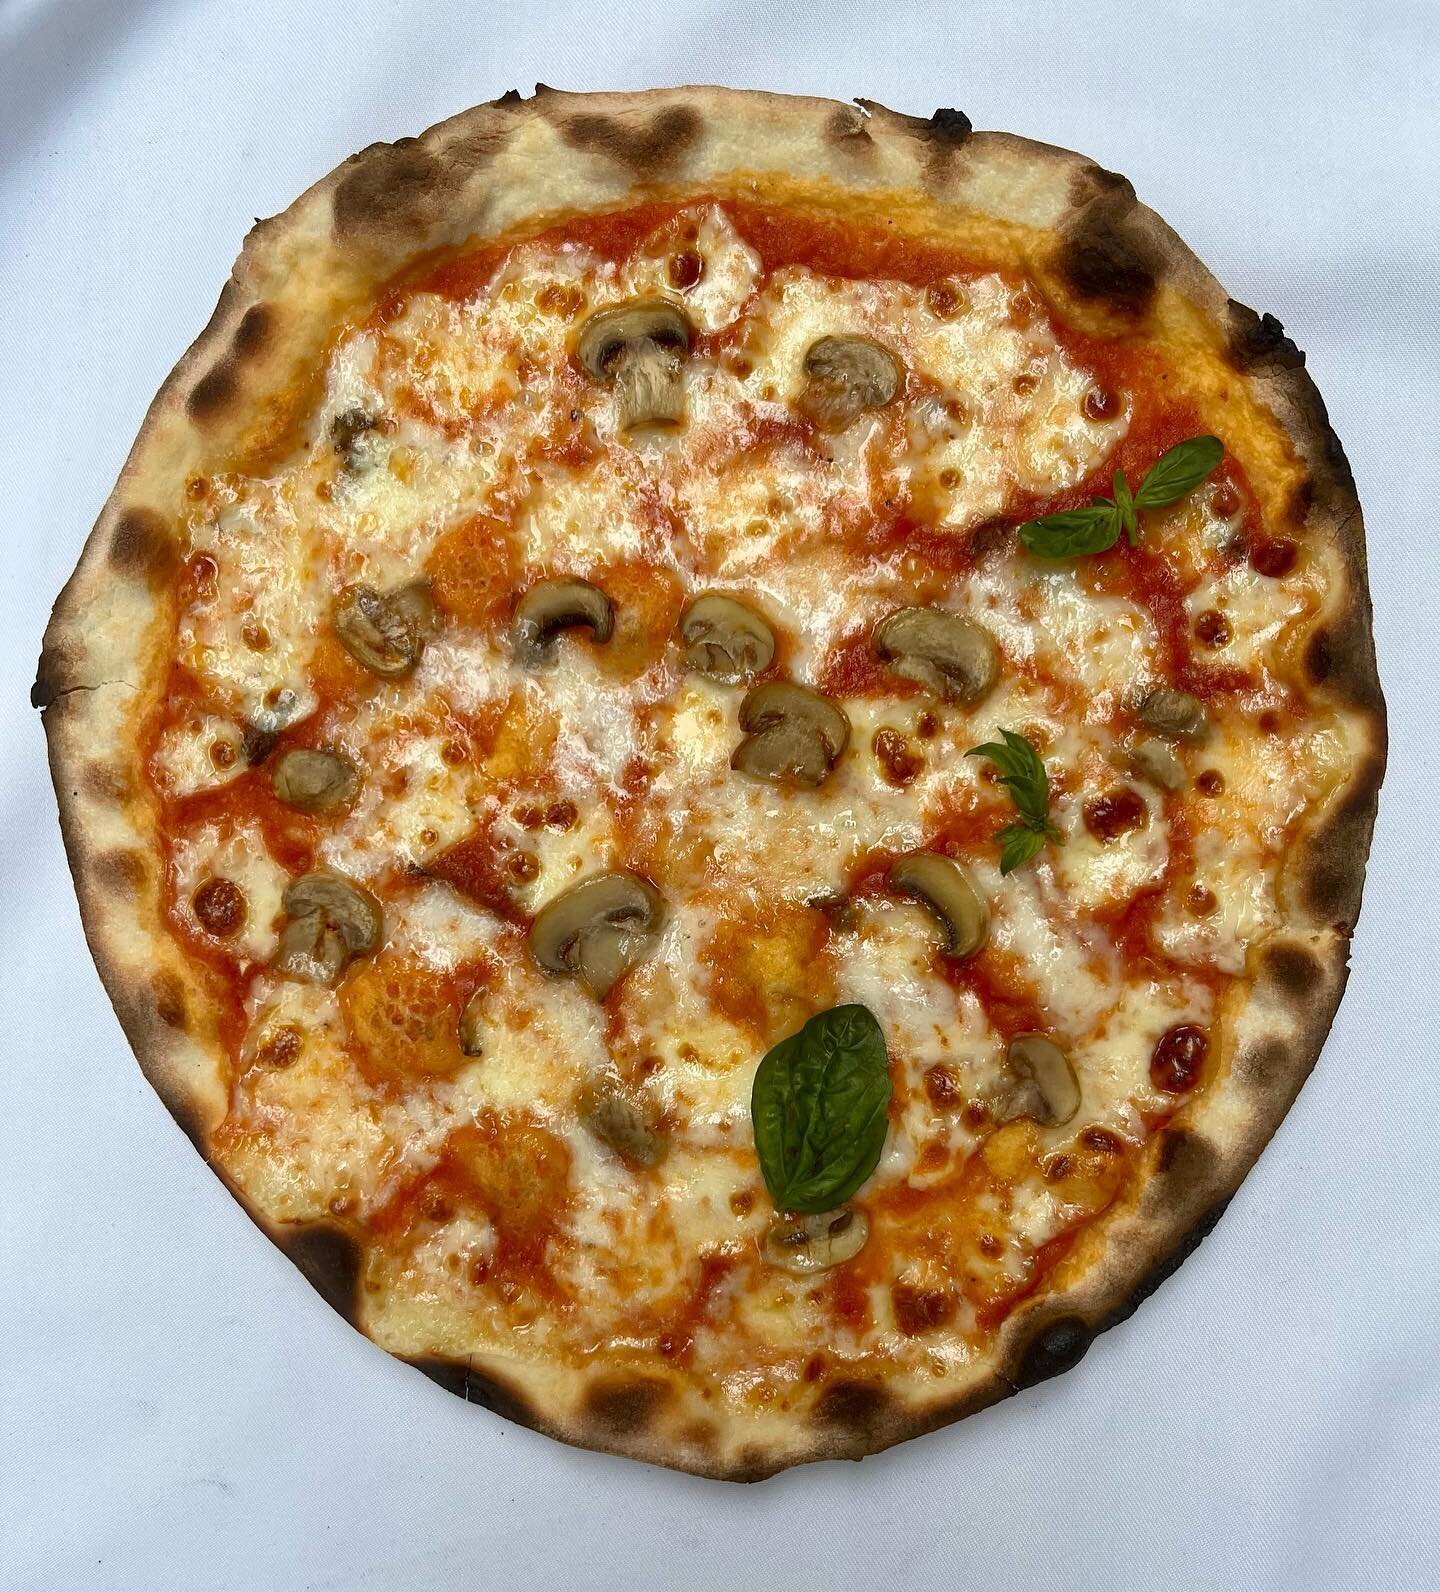 Thin crust sourdough pizzas 

Homeslice pizzas are twice as tasty and half as heavy Vs any other pizza , try us , you&rsquo;ll love it .

DiY pizzas | Baked pizzas | Pasta | Salad | Burrata 

✔️Thin crust artisan pizzas 
✔️Veg only 
✔️Jain &amp; Vega